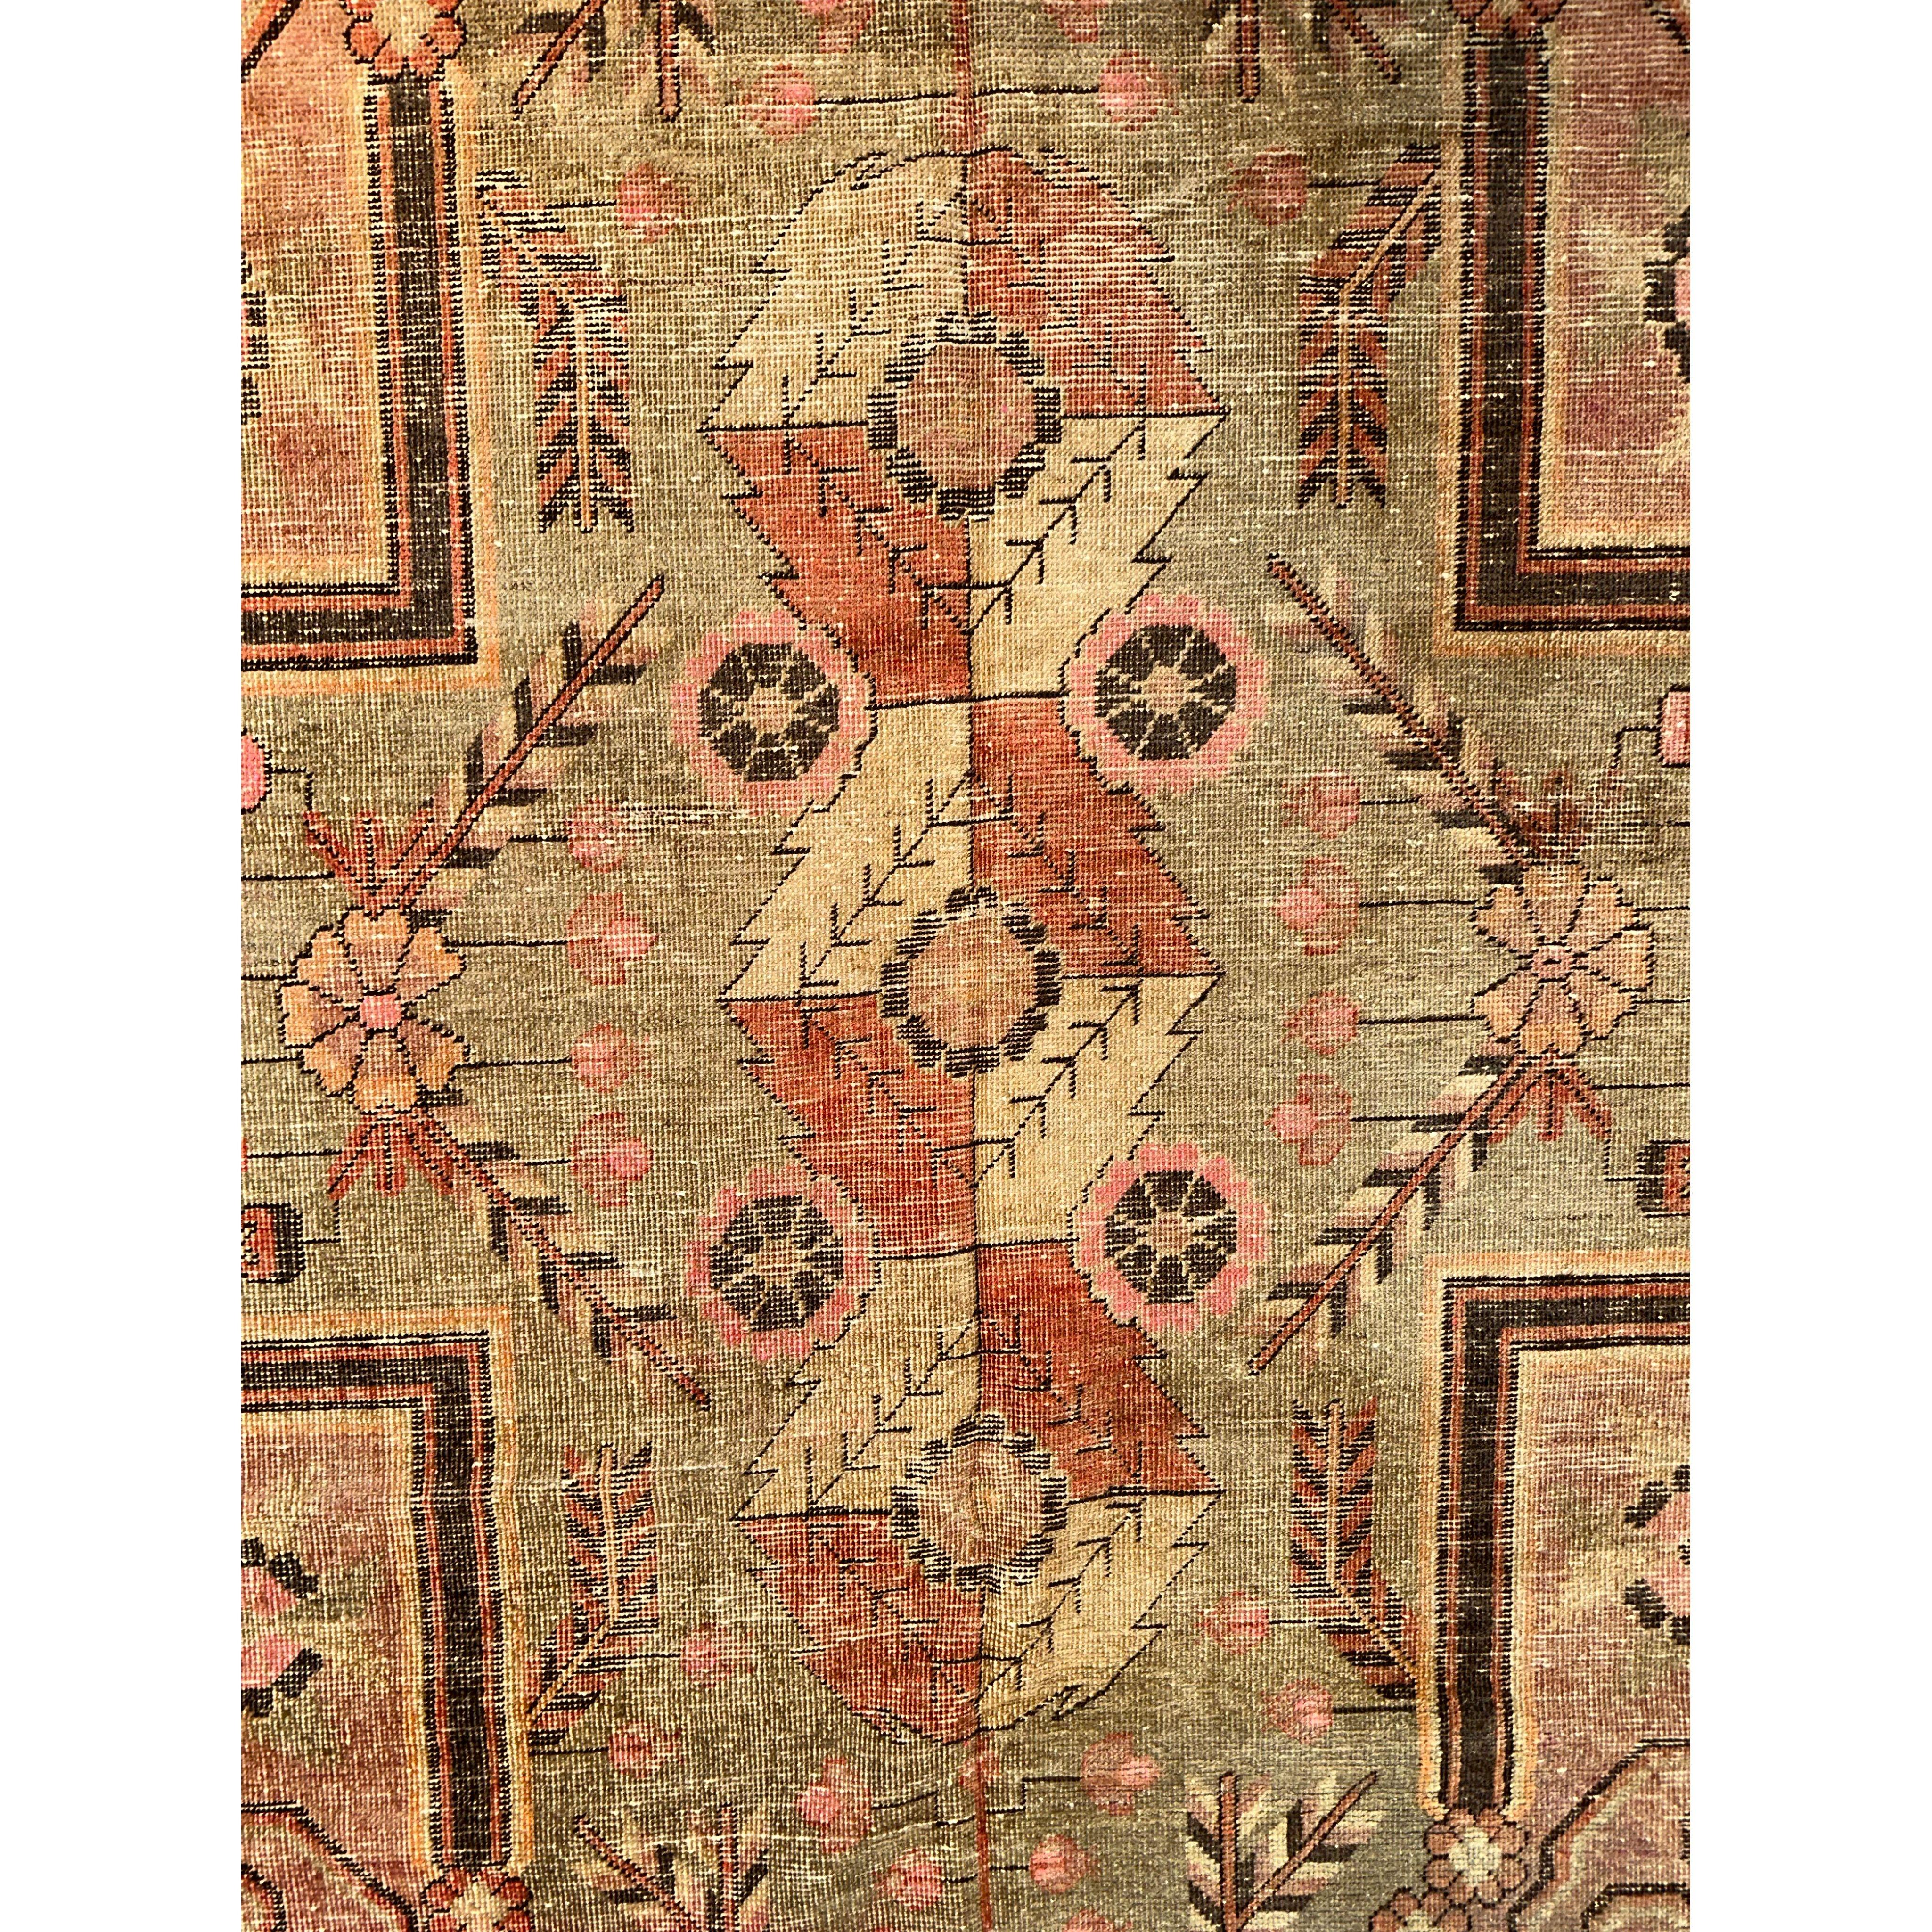 Late-19th Century Khotan Samarkand Rug In Good Condition For Sale In Los Angeles, US